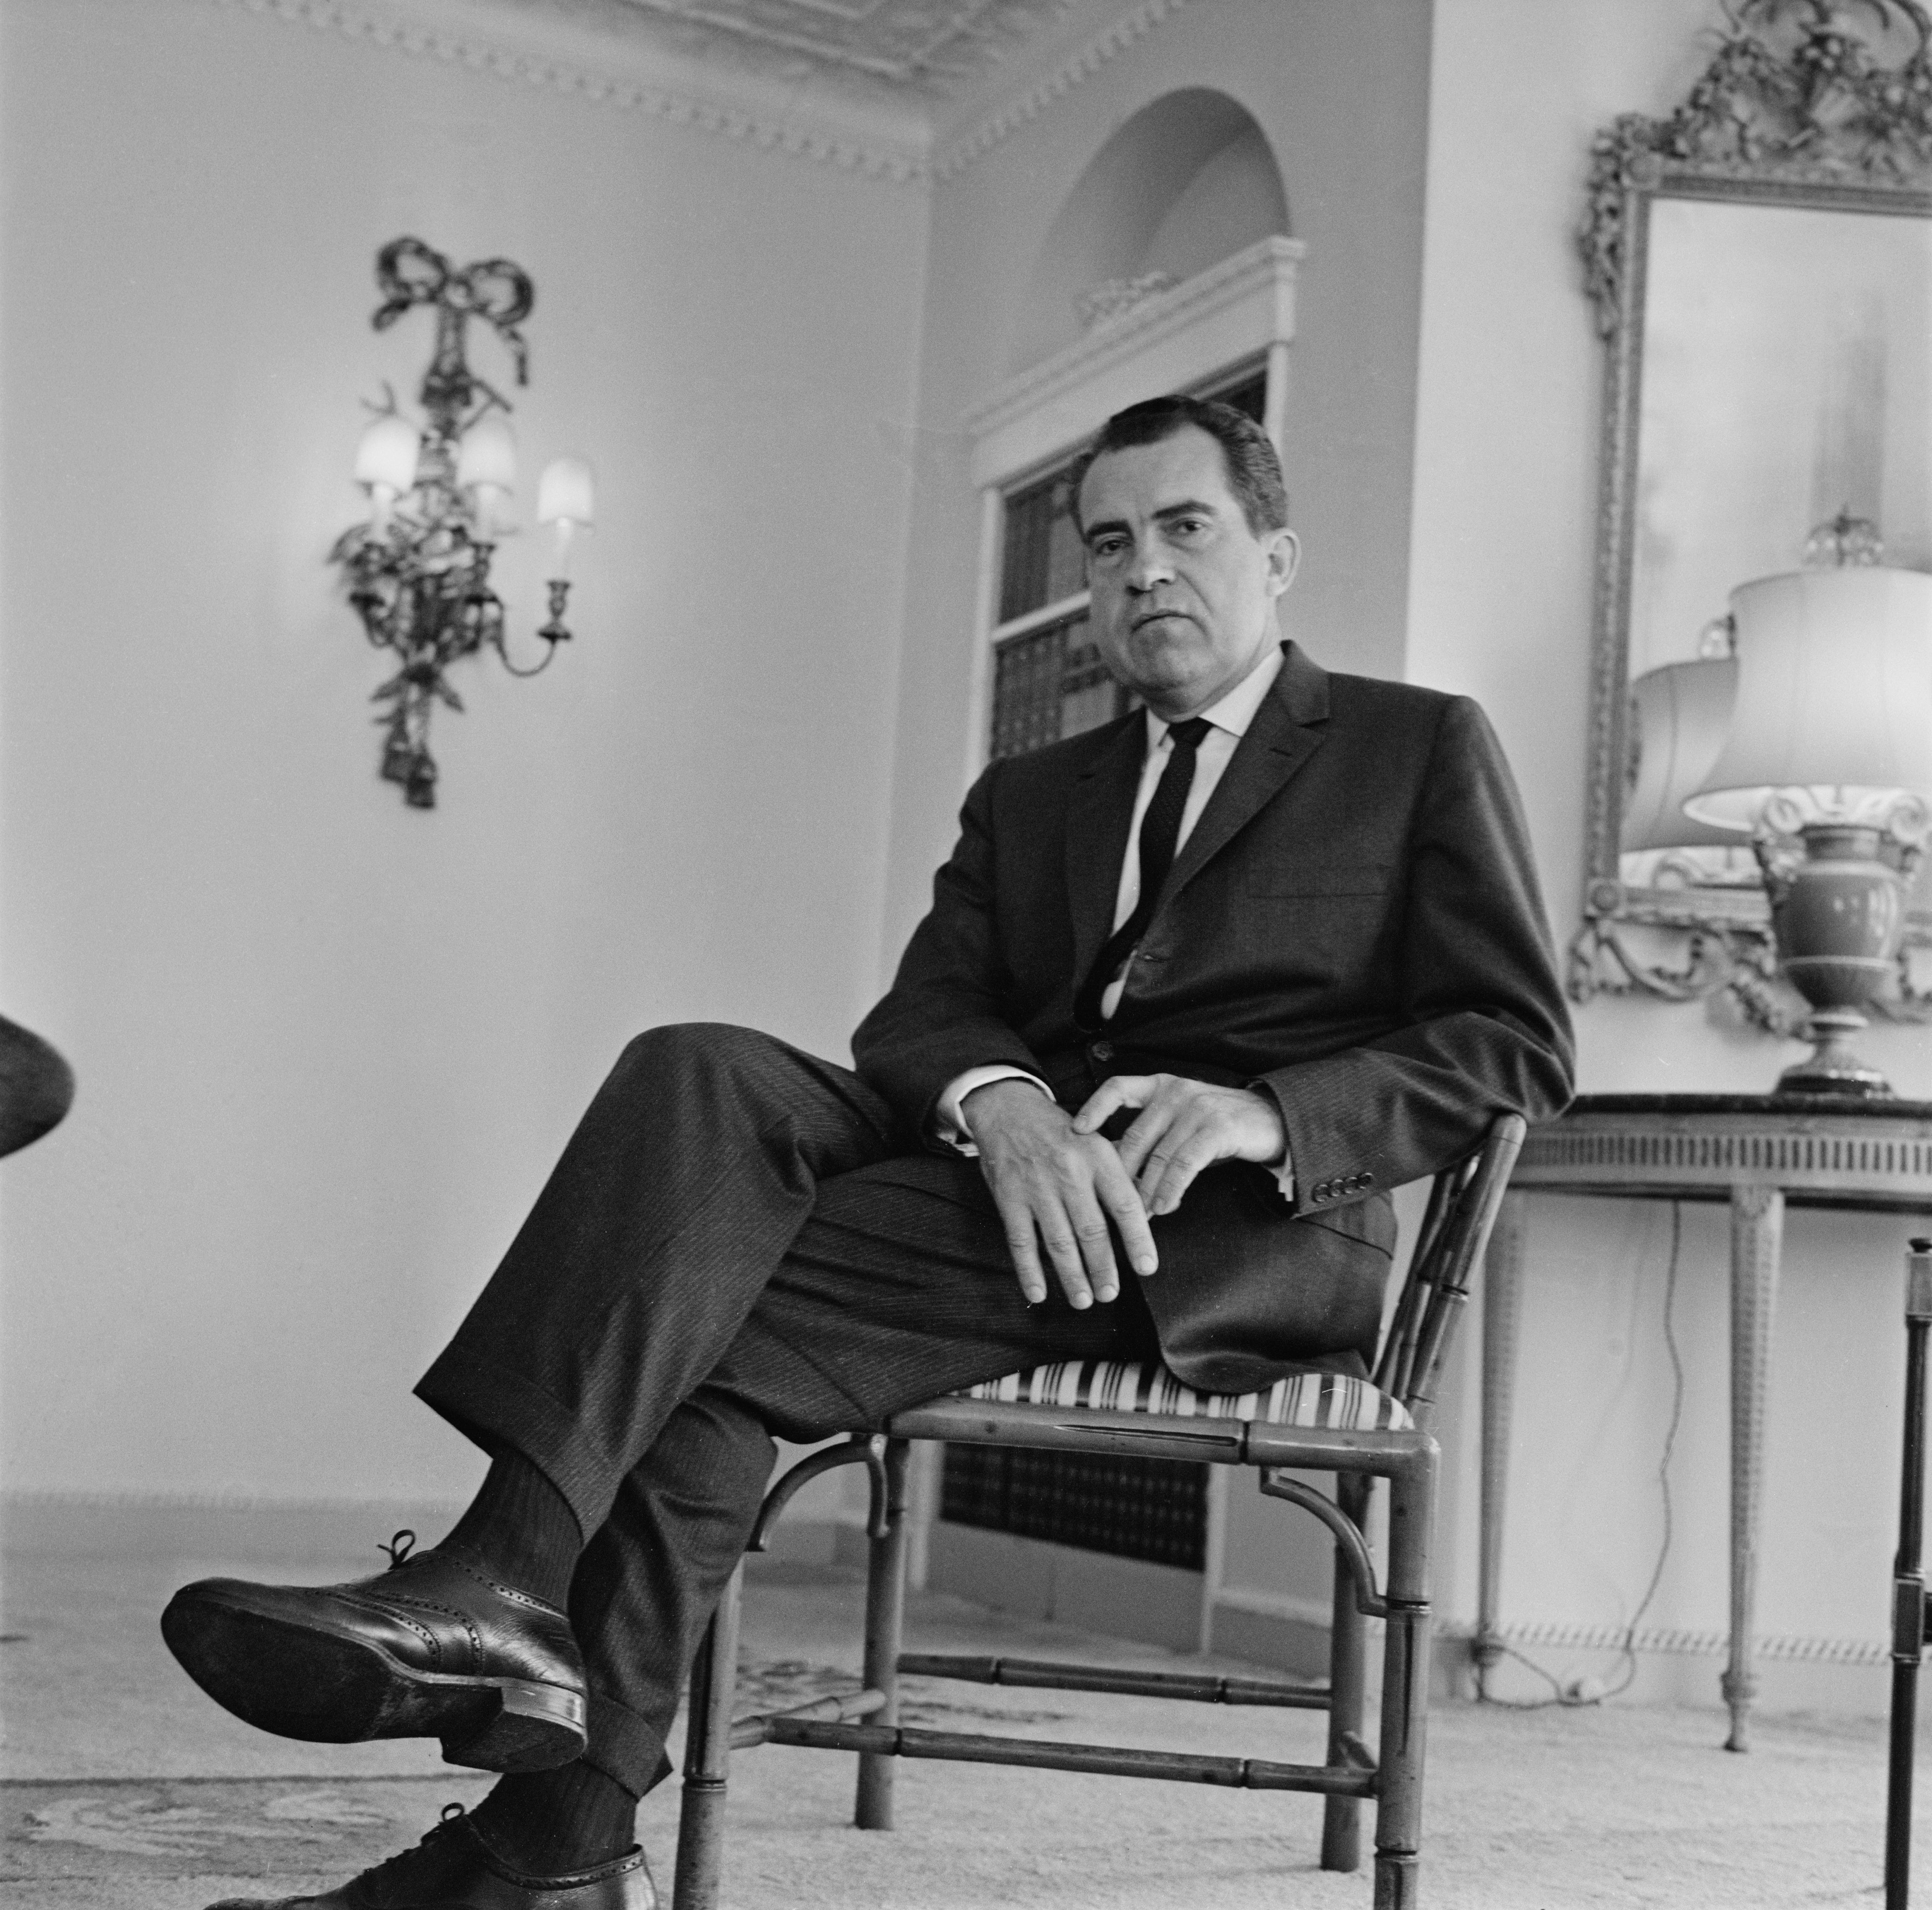 Richard Nixon (1913-1994) in a room at the Dorchester Hotel in London on 7 August 1963